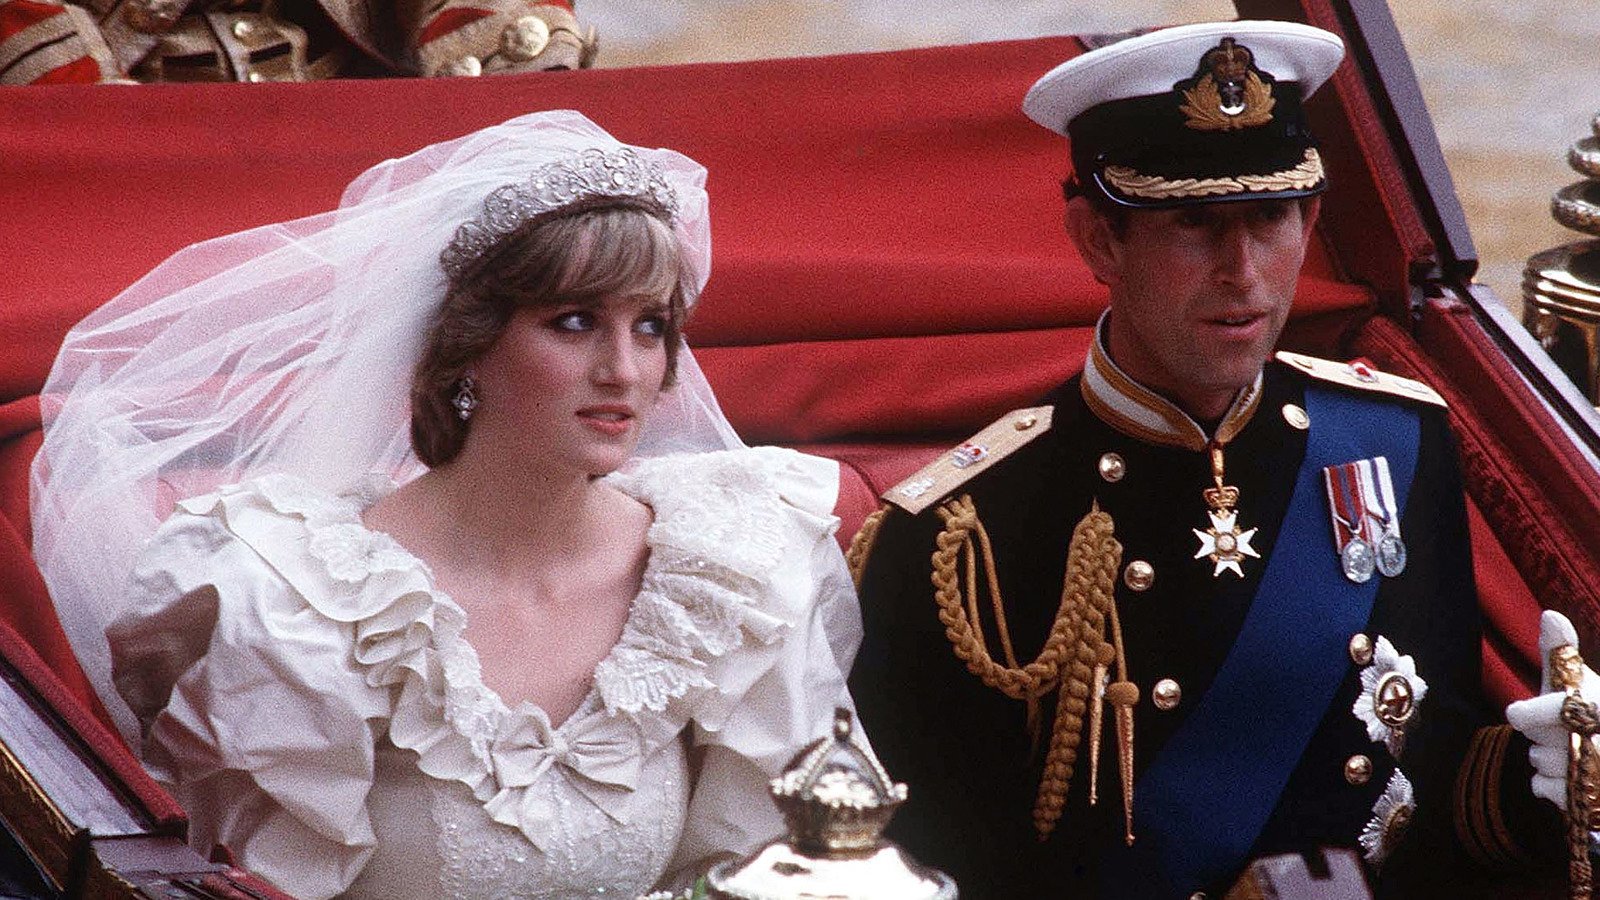 This Royal Had The Best Wedding Dress, According To 35% Of People